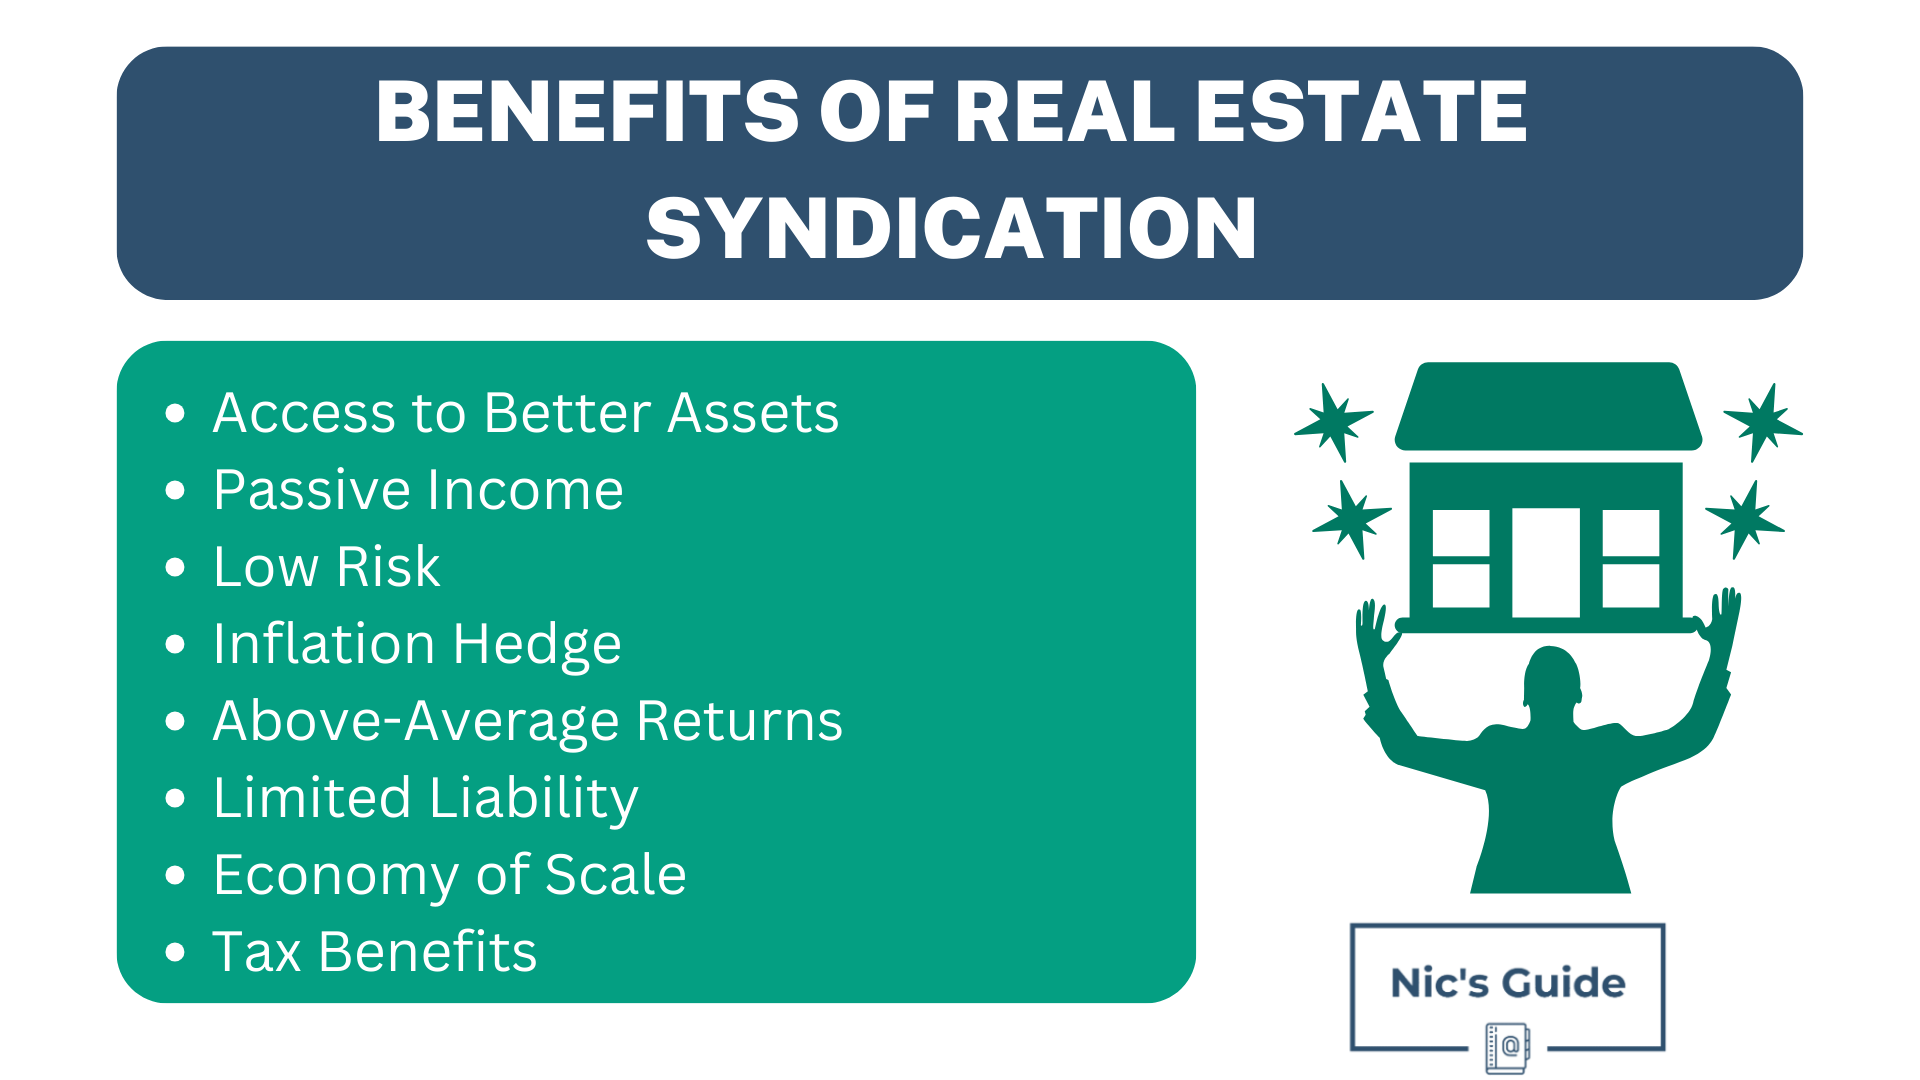 Benefits of real estate syndications